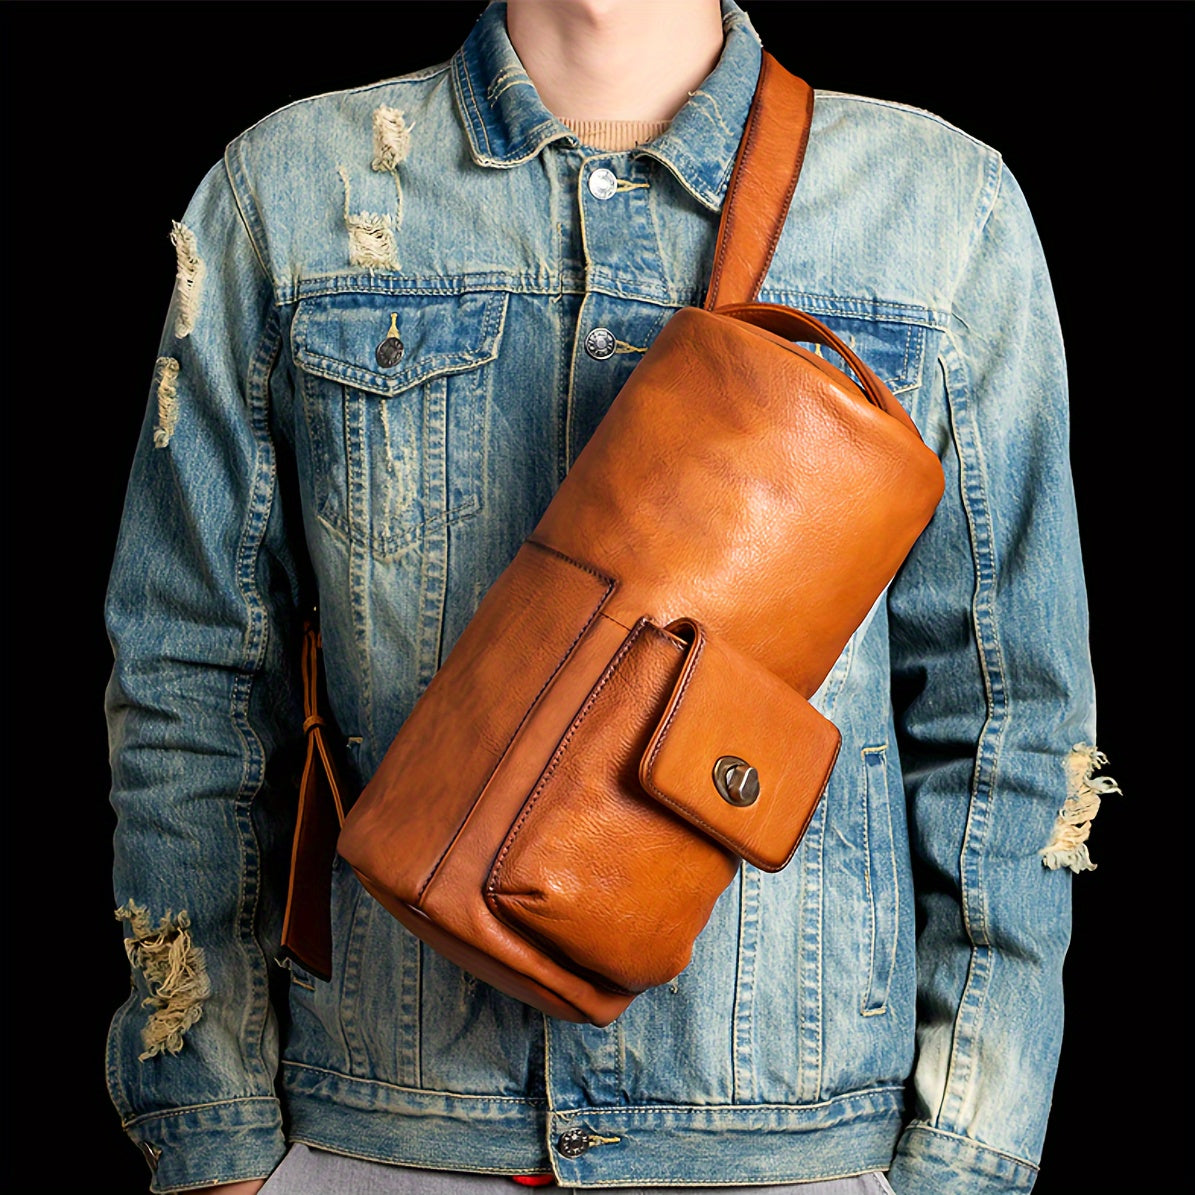 1pc Men's Genuine Leather Backpack, Top Layer Cowhide Material, Retro Leather Style, Large Capacity And Multiple Compartments, Natural Leather Texture Casual Bag